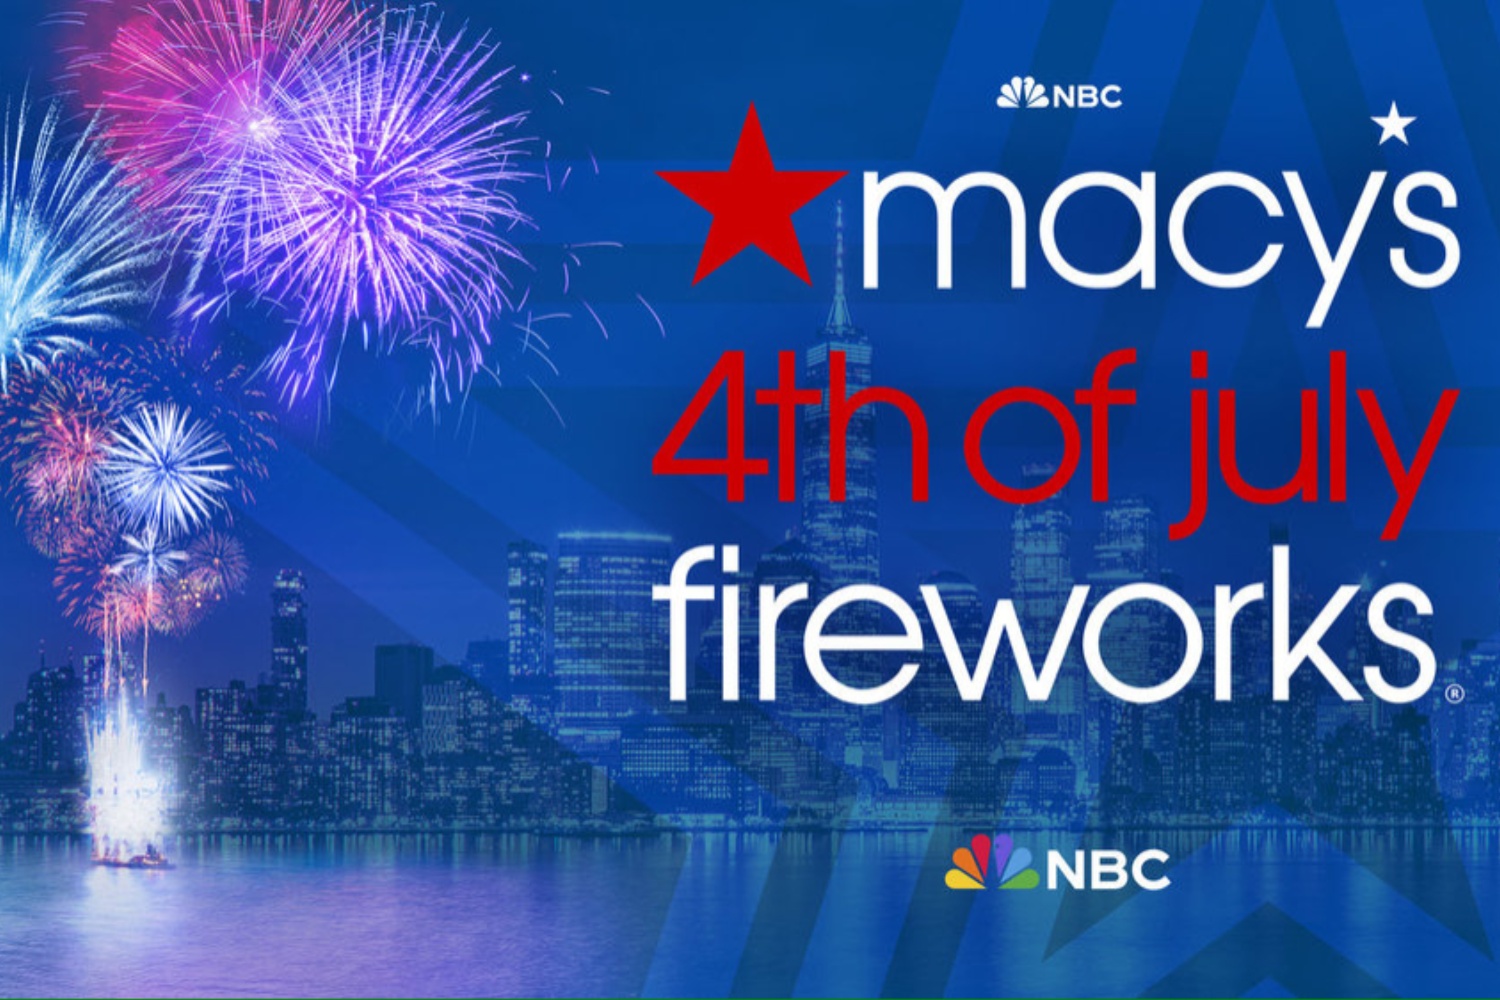 Poster for the Macy's 4th of July Fireworks celebration.